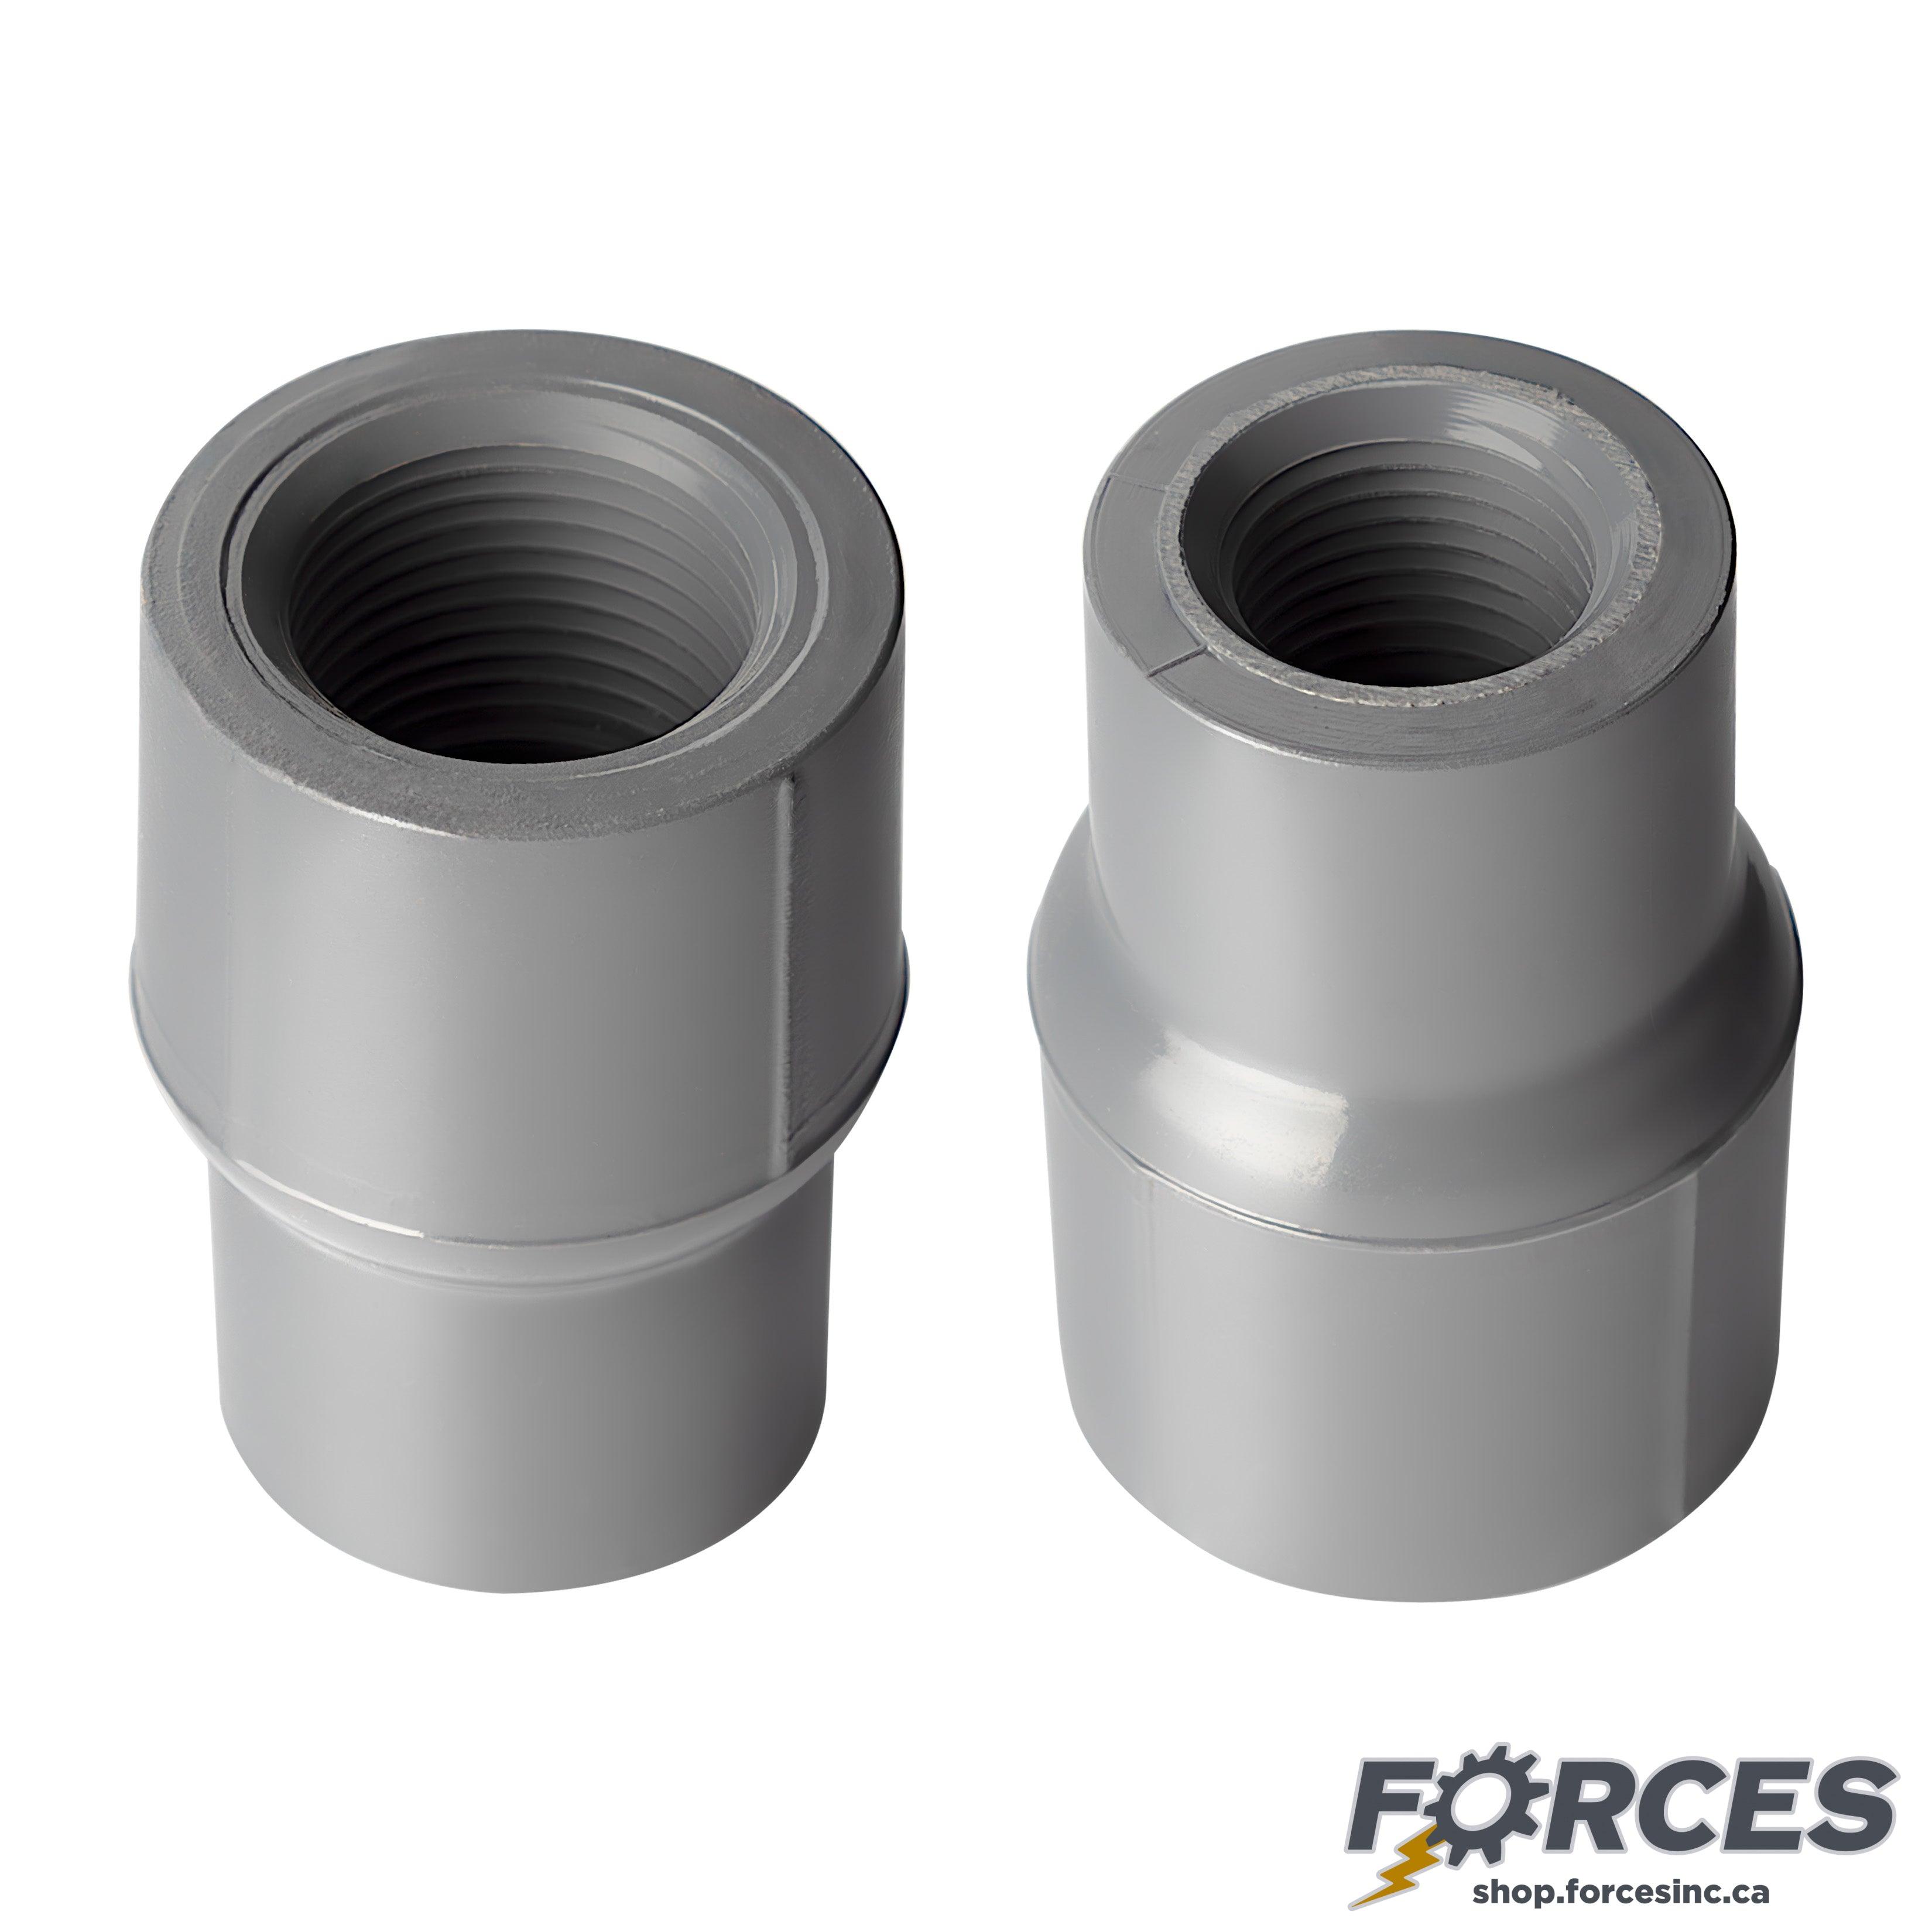 1-1/2" x 1/2" Reducing Coupling (Threaded) Sch 80 - PVC Grey | 830209 - Forces Inc